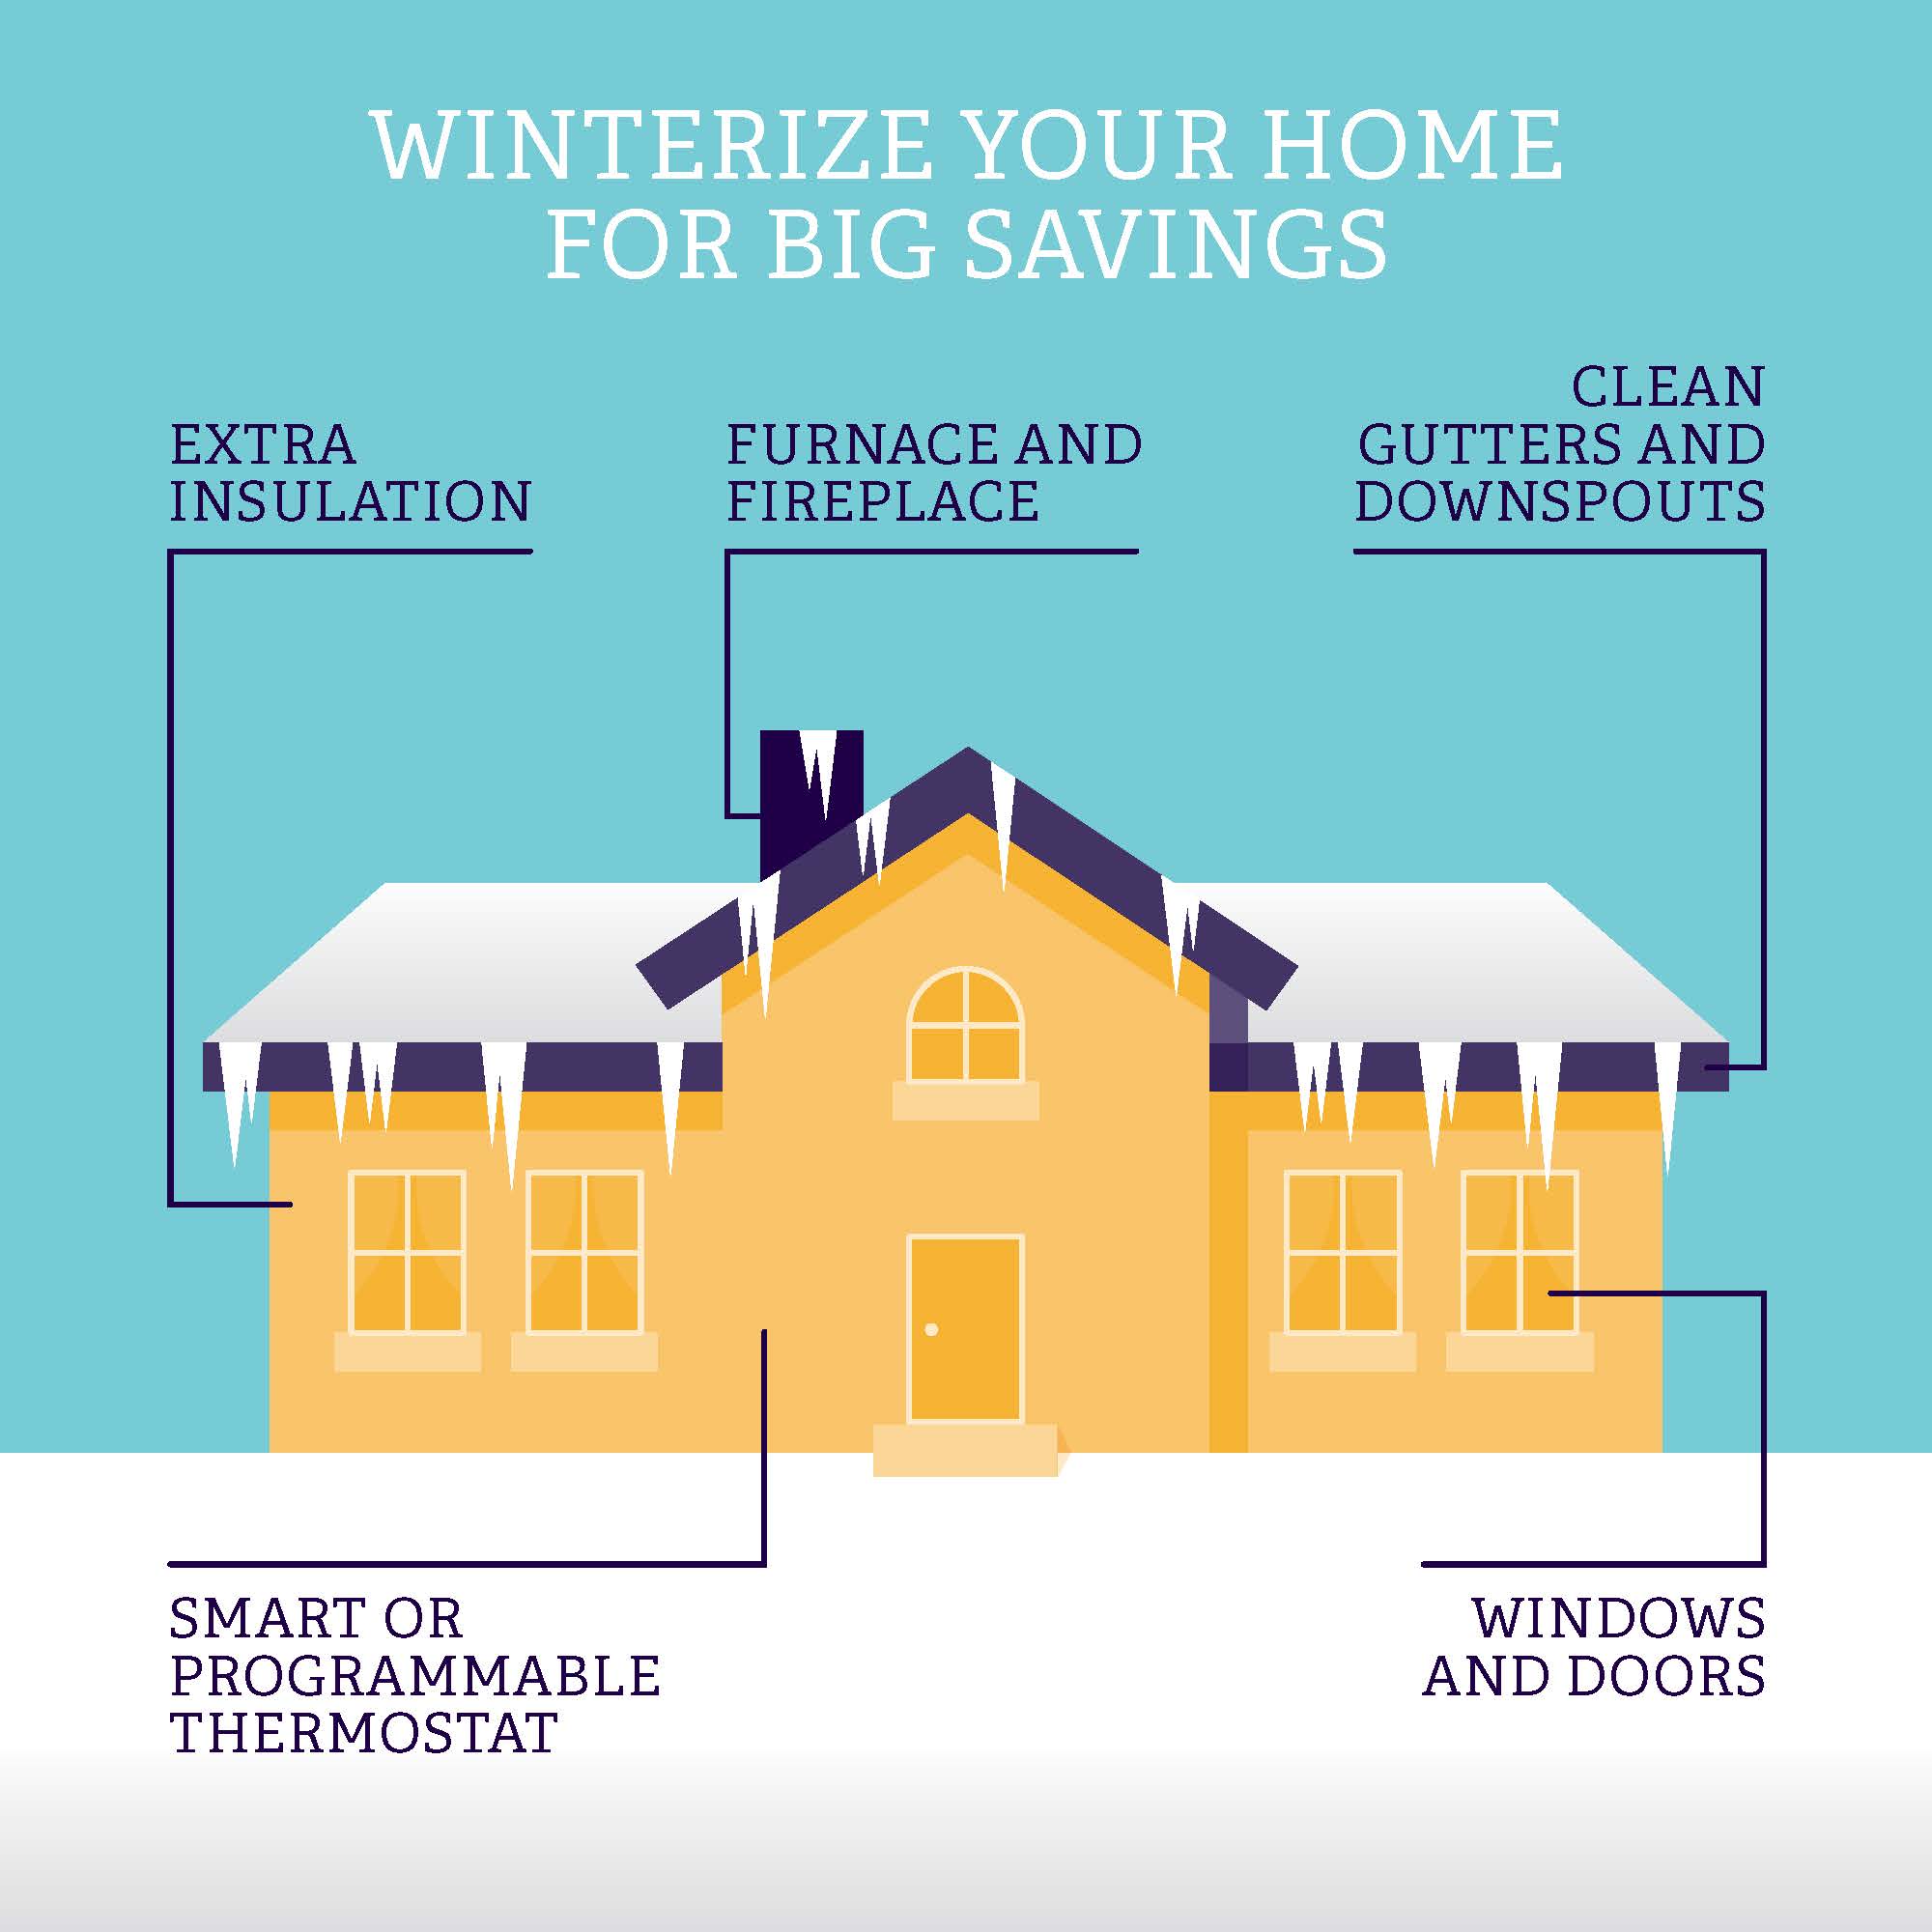 Brr! Winterize your home for big savings Denver Urban Renewal Authority